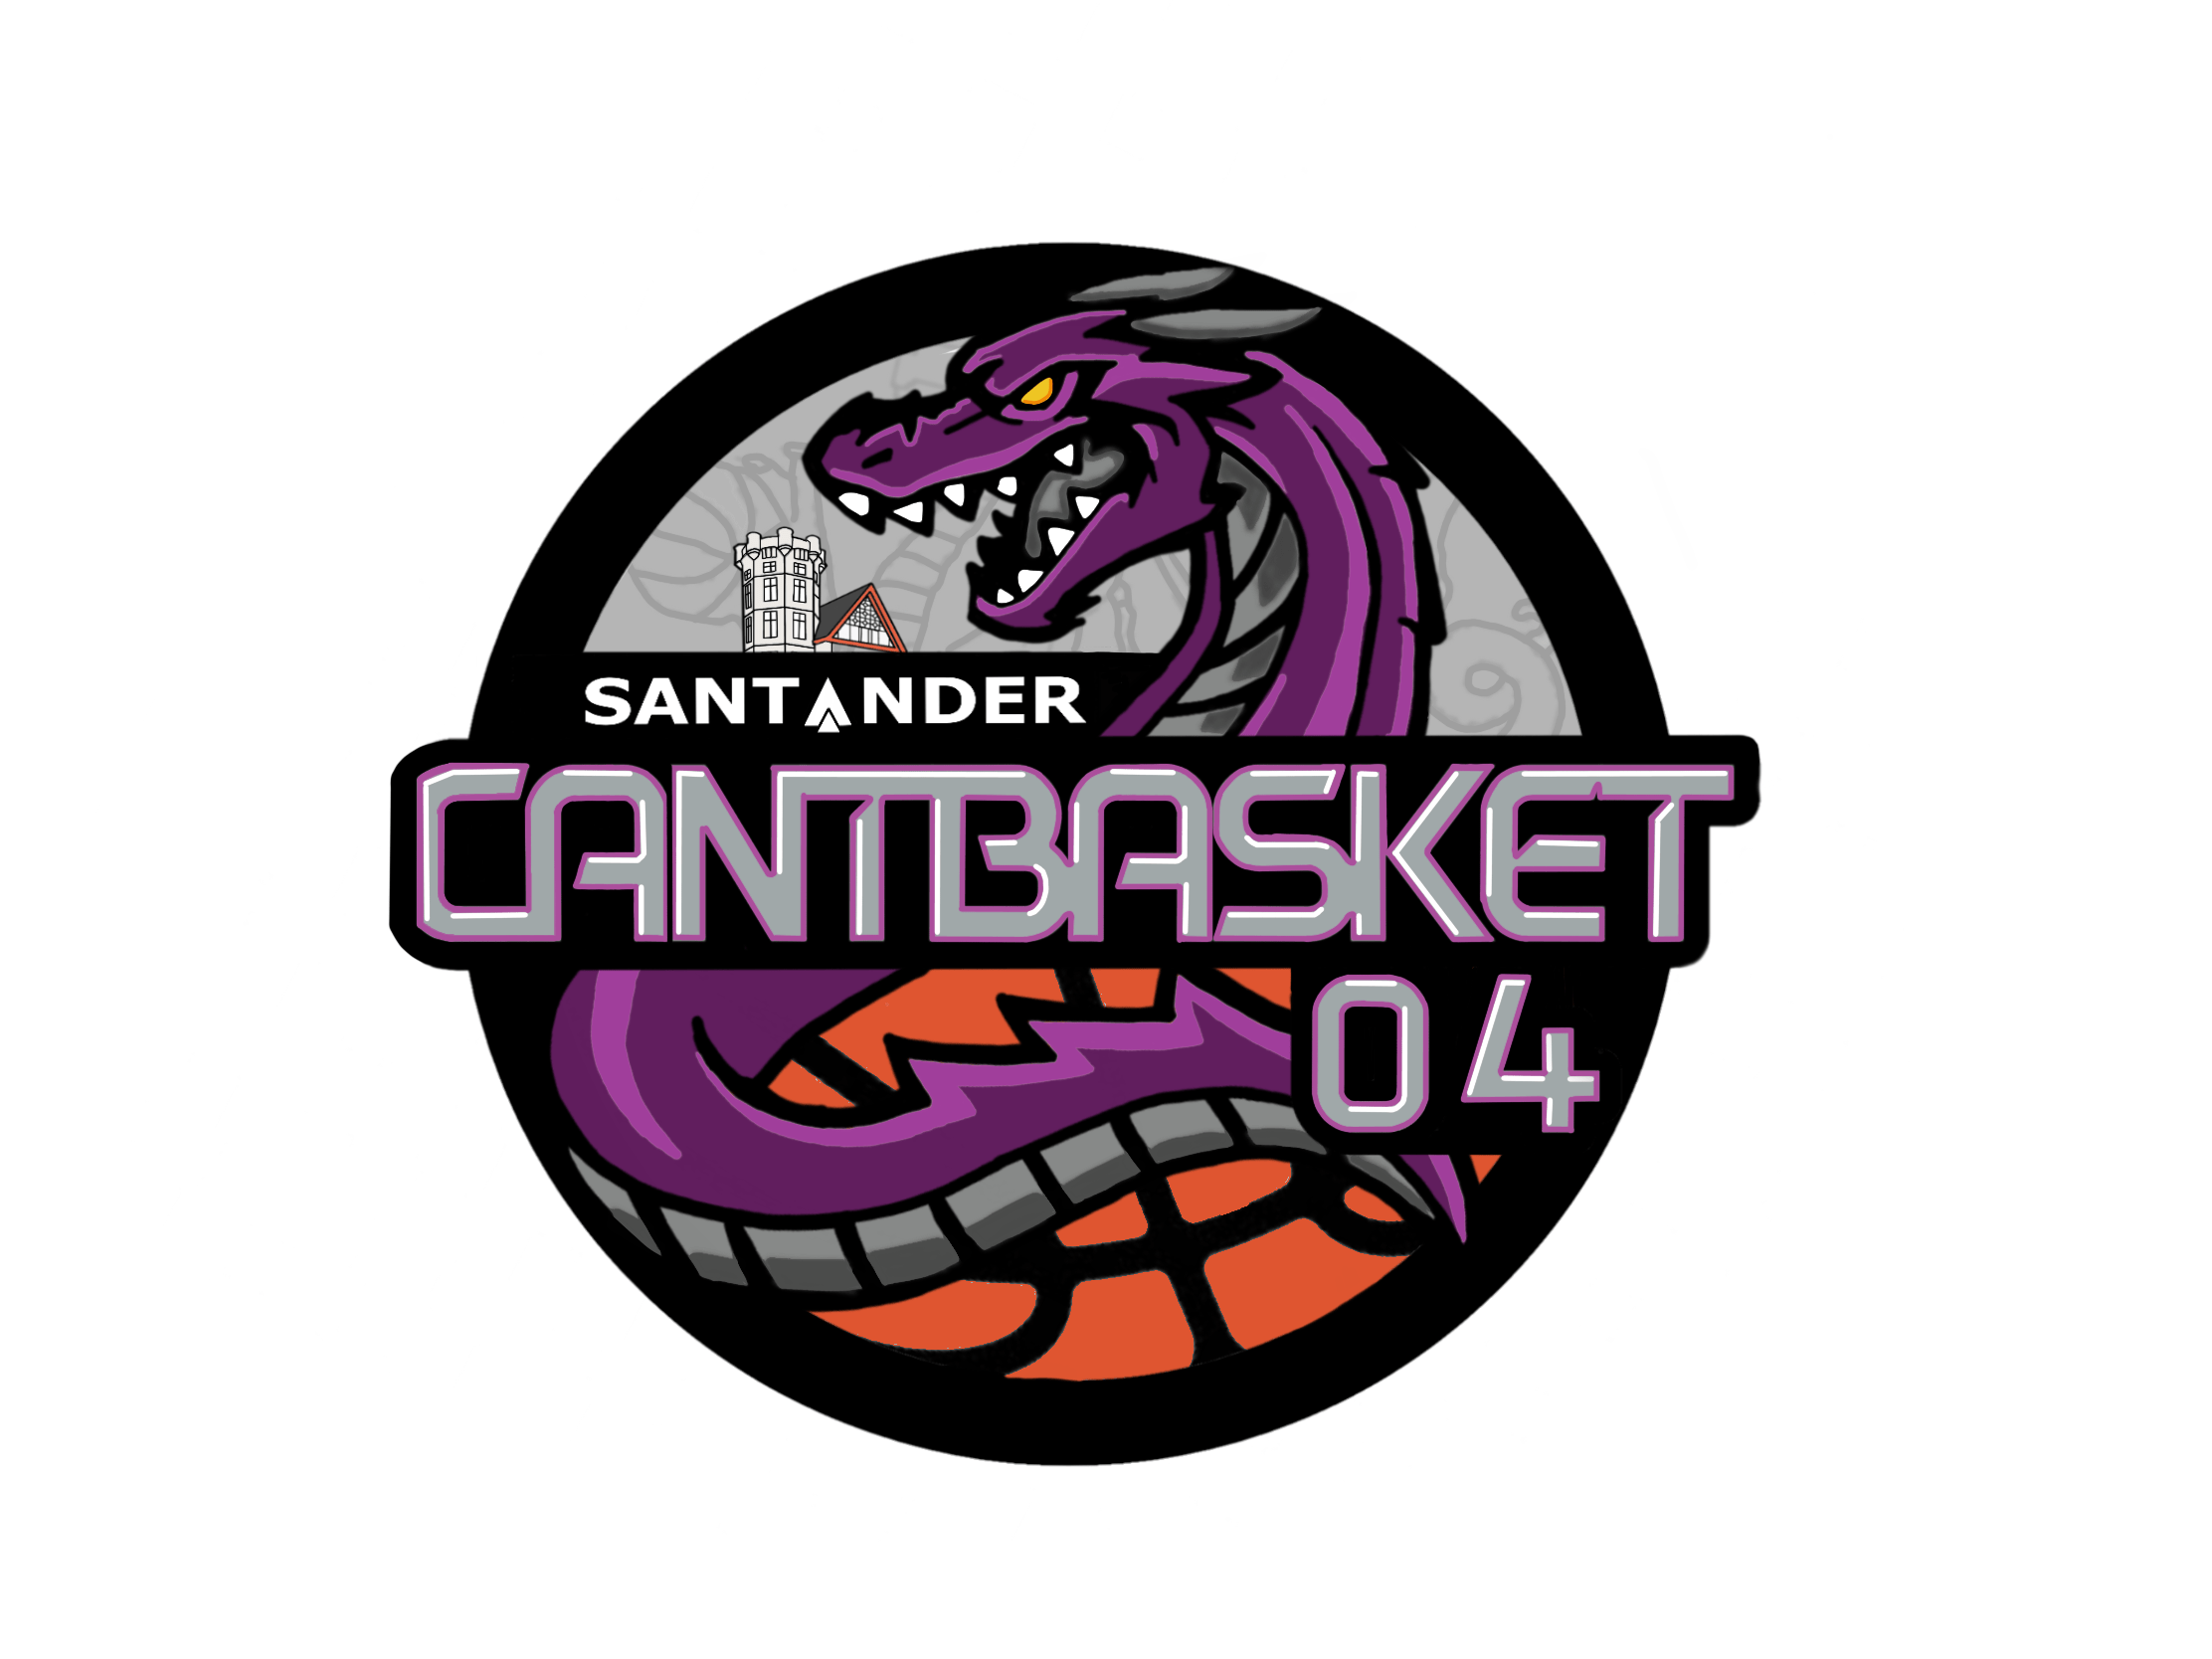 Cantbasket 04